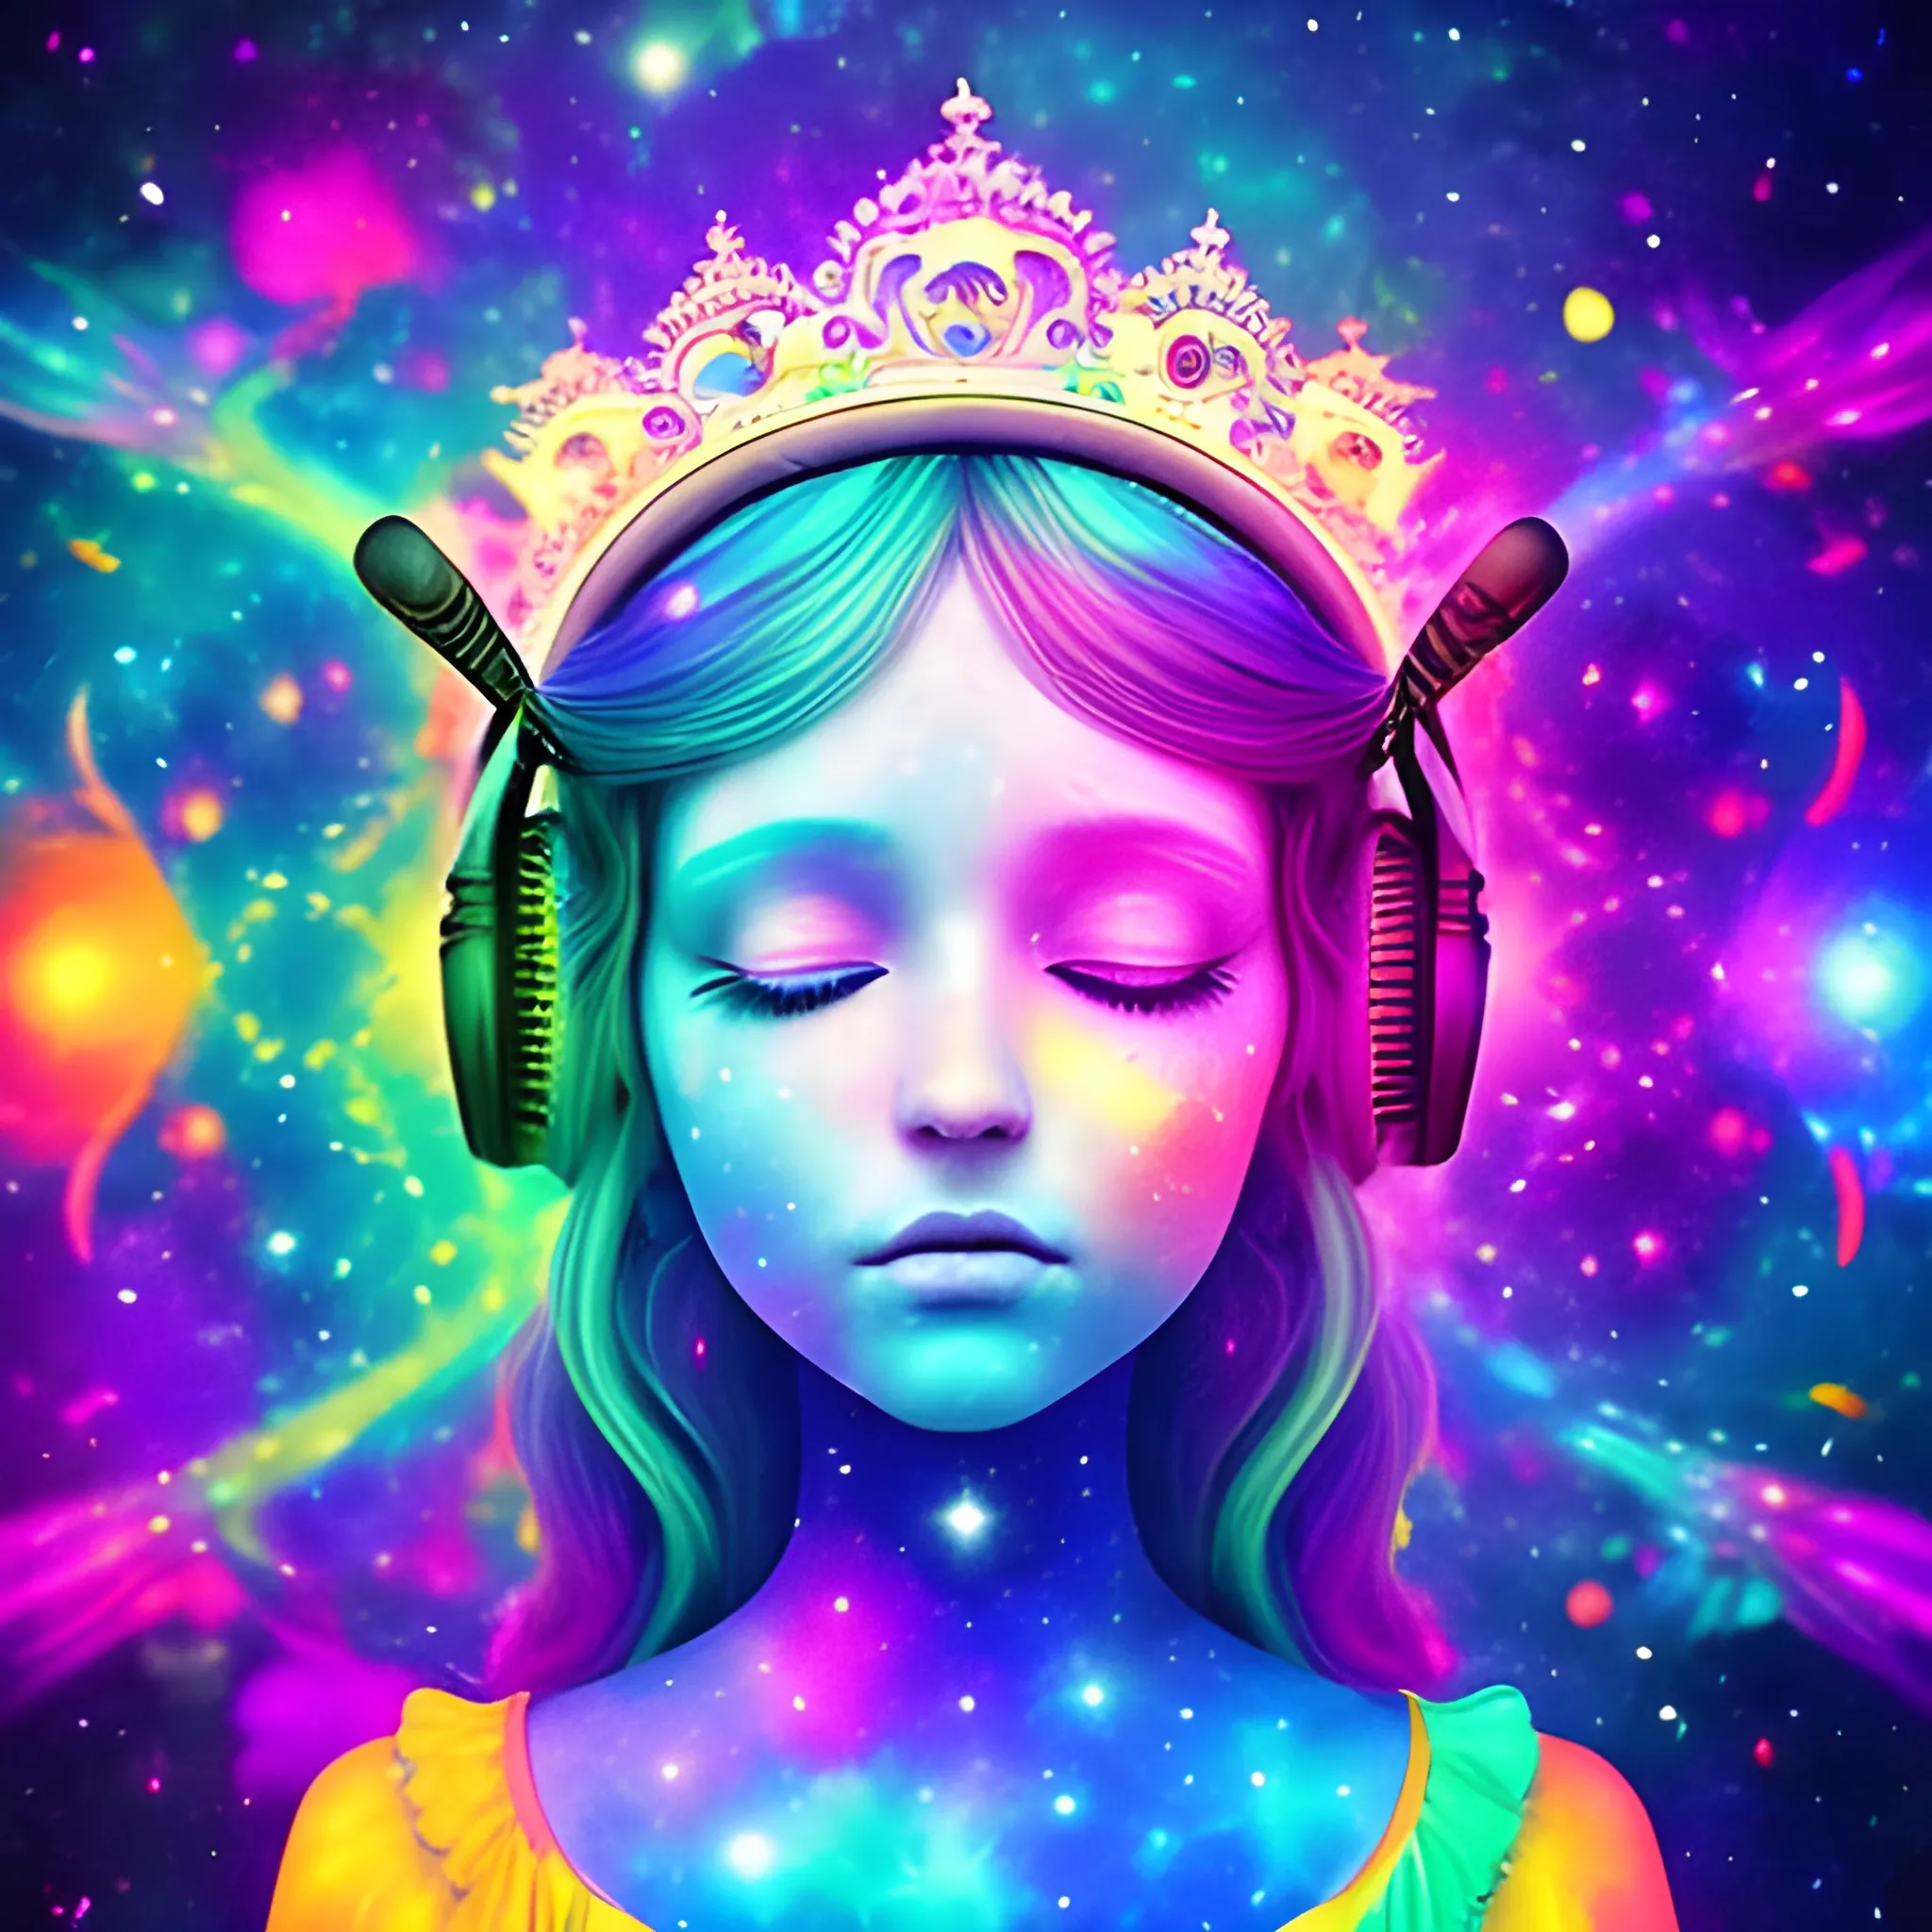 , Trippy, colorful, universe, music, princess, open eyes
